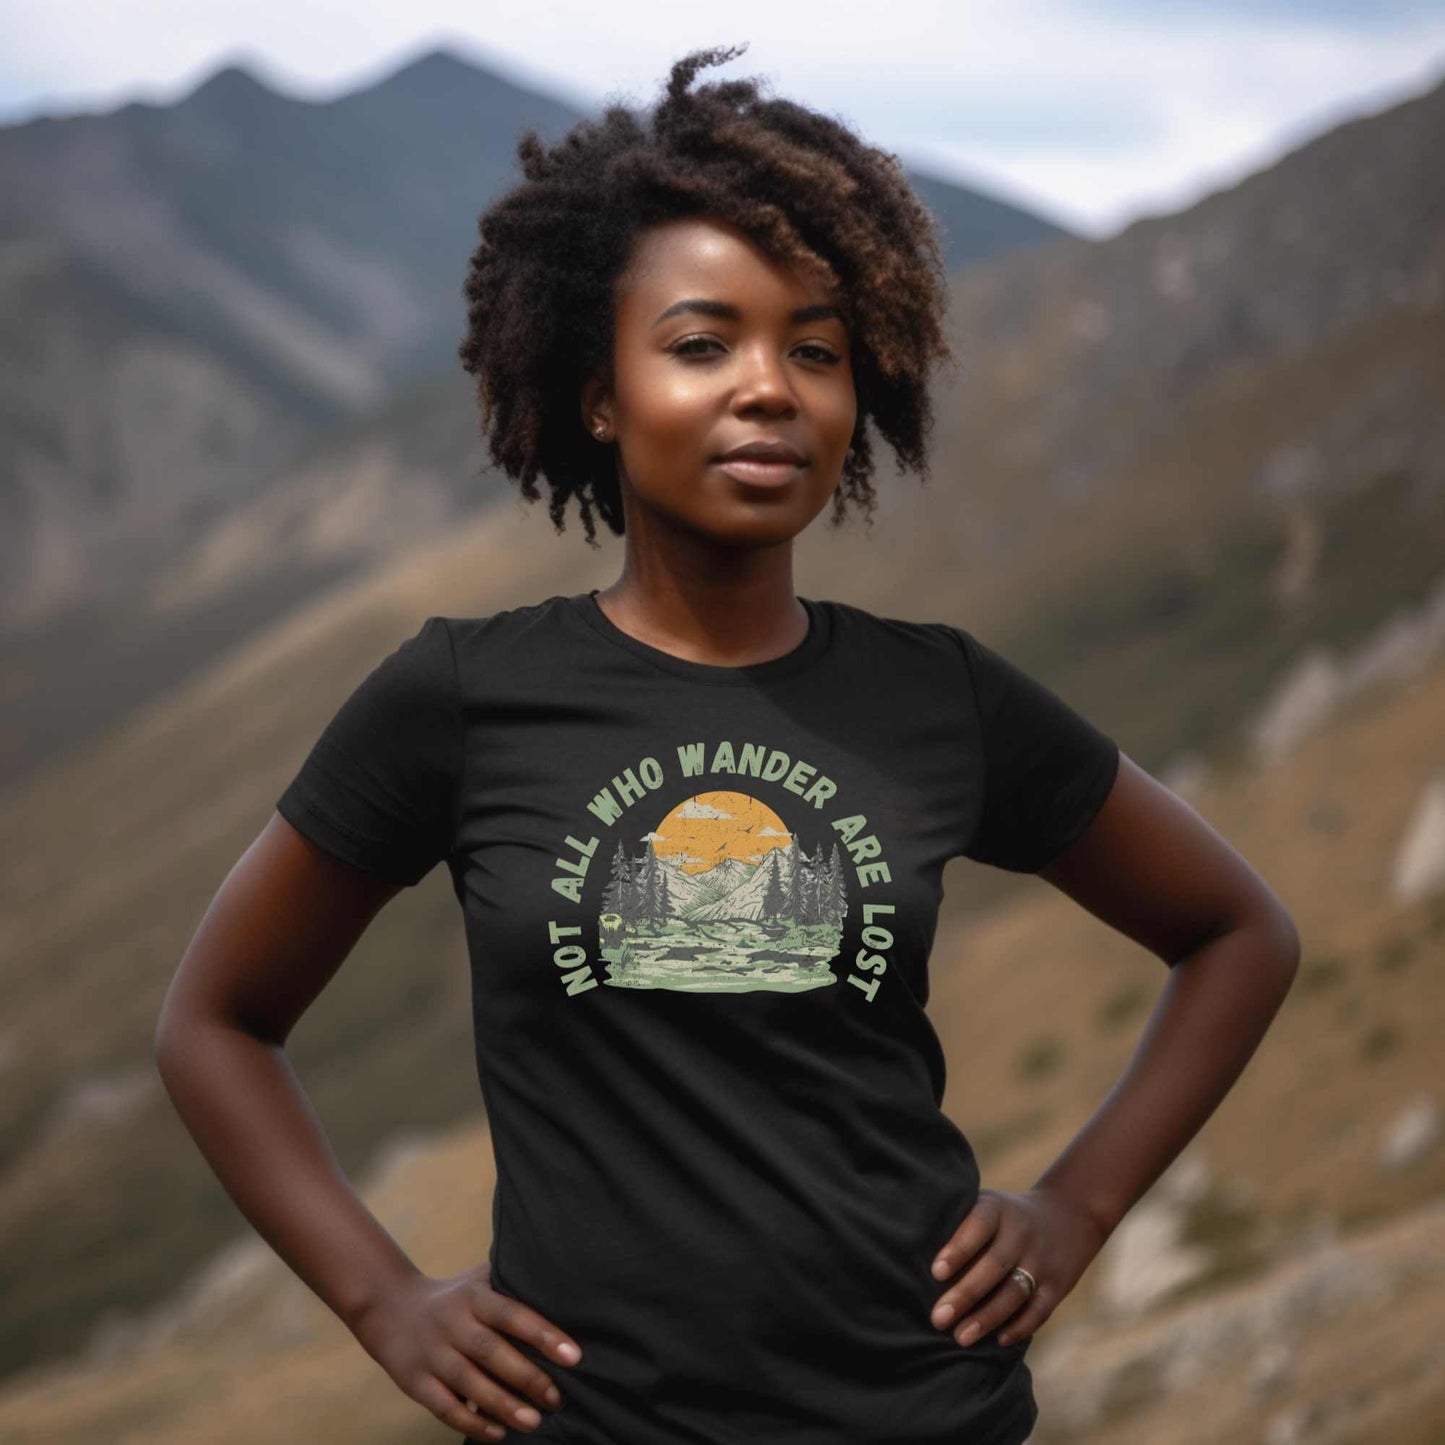 Not All Who Wander Are Lost T-Shirt - Adventure Threads Company